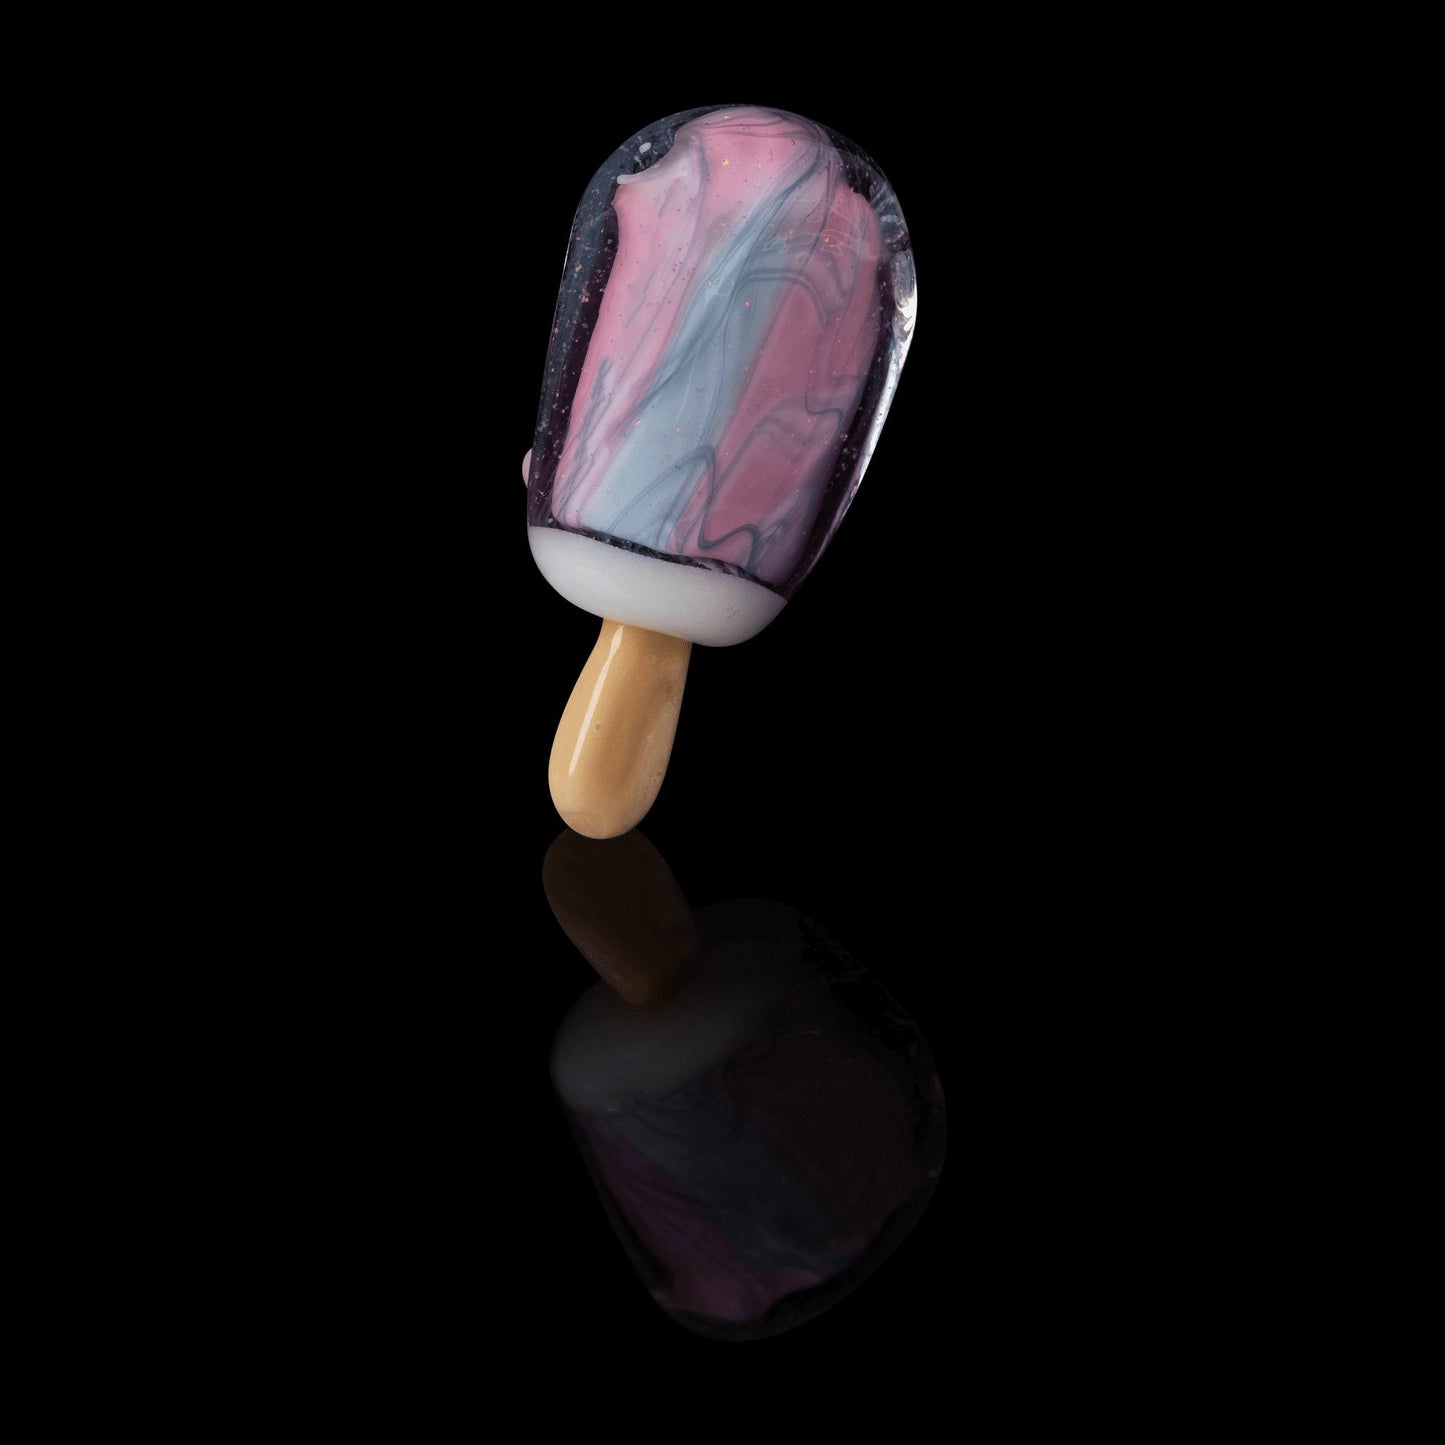 artisan-crafted glass pendant - Collab Scribbly Popsicle Pendant (B) by Sakibomb Hackysacky x Scomo Moanet (Scribble Season 2022)